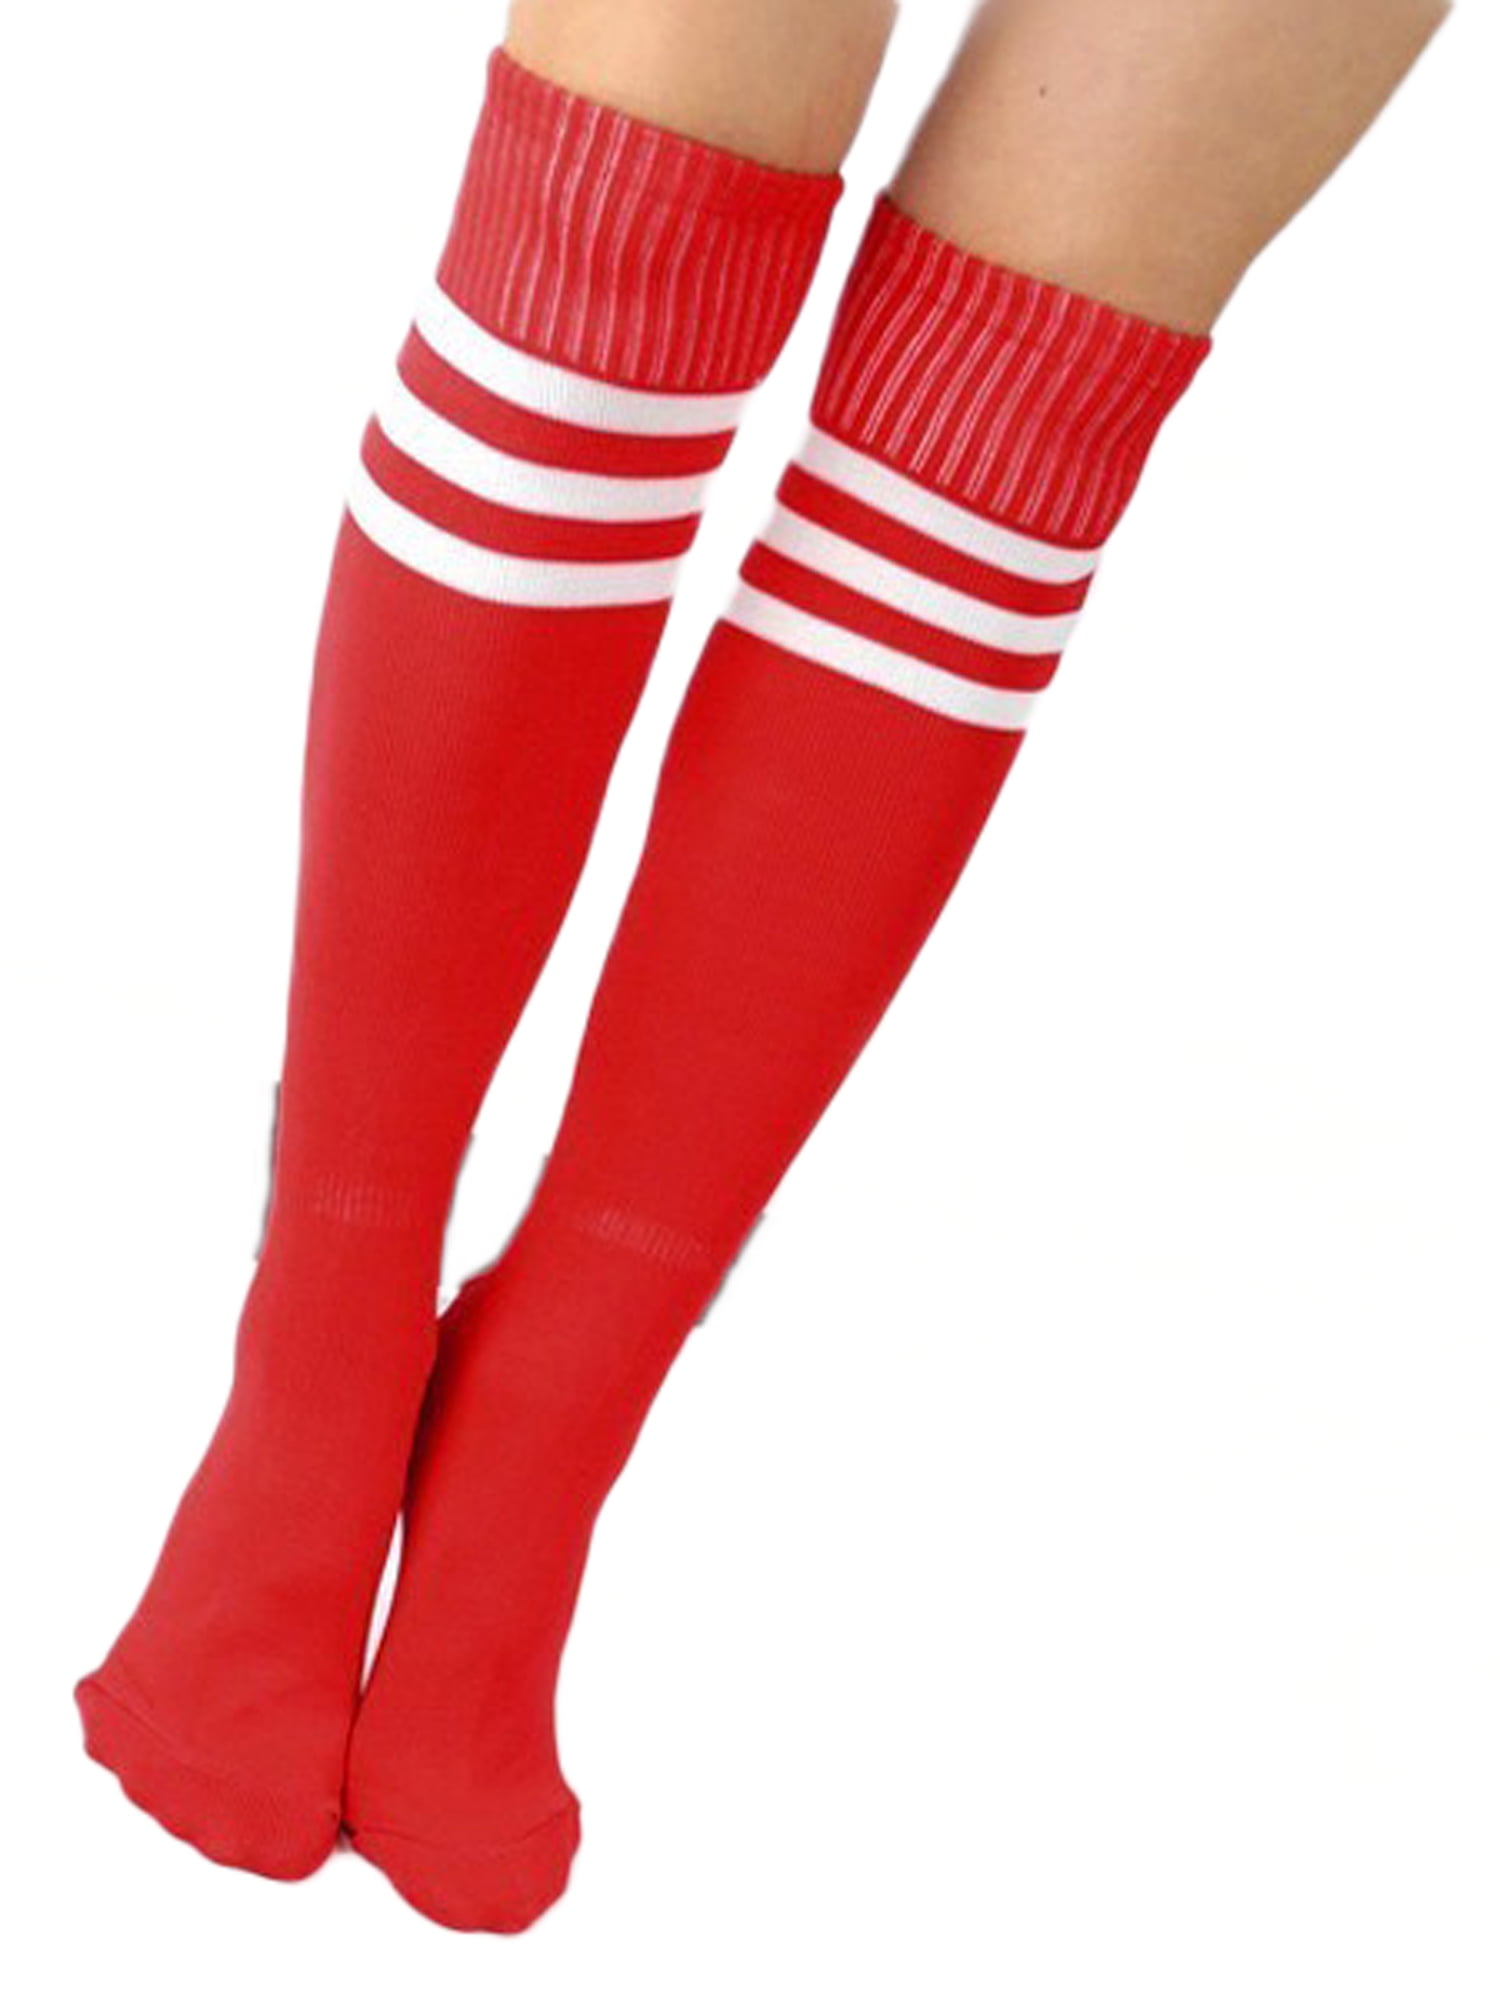 Womens Black Thigh High Socks Cotton Over The Knee Stocking Tights Non Slip Thin Lightweight Long Boot Leg Warmers Dress Socks for School Cosplay Workout Plus Size 